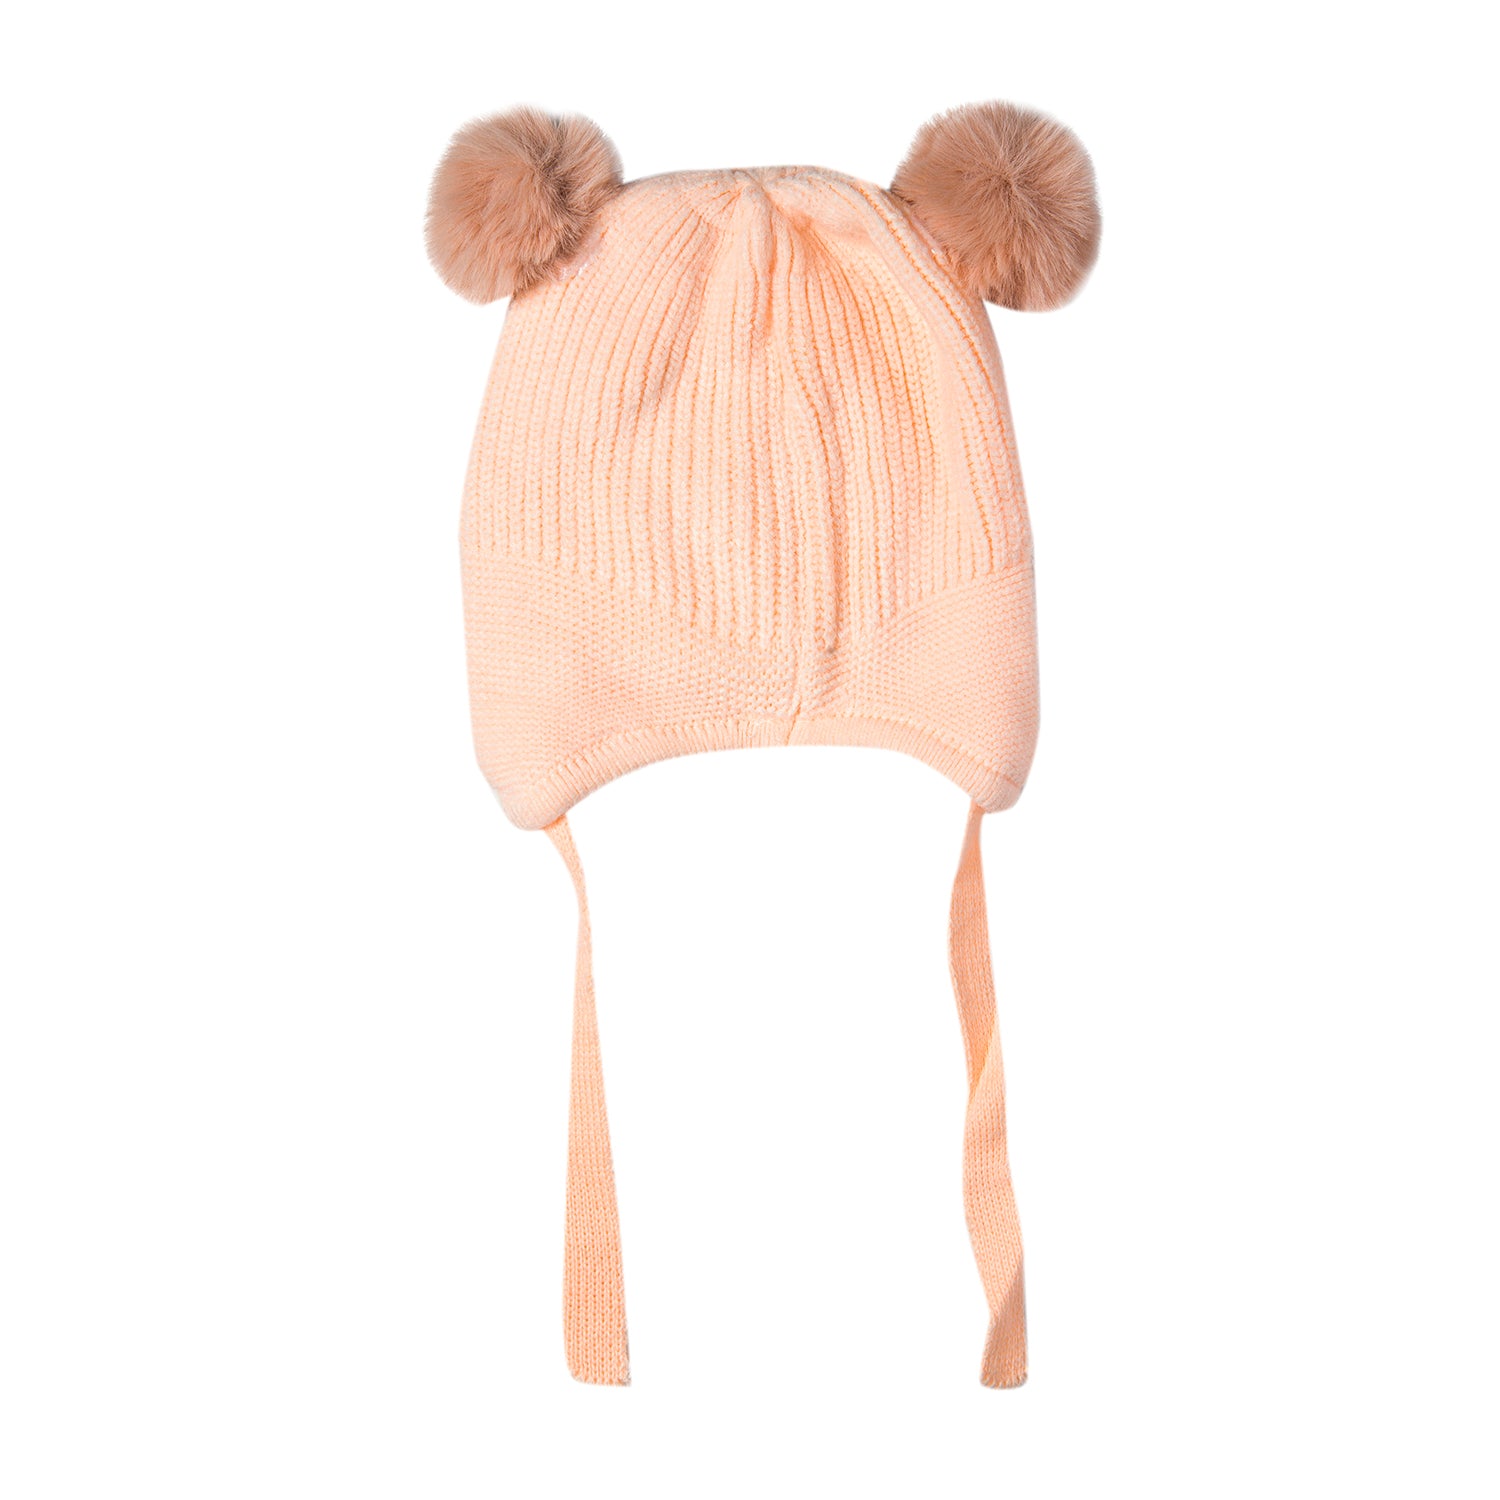 Knit Woollen Cap With Tie Knot For Ear Protection Solid Peach